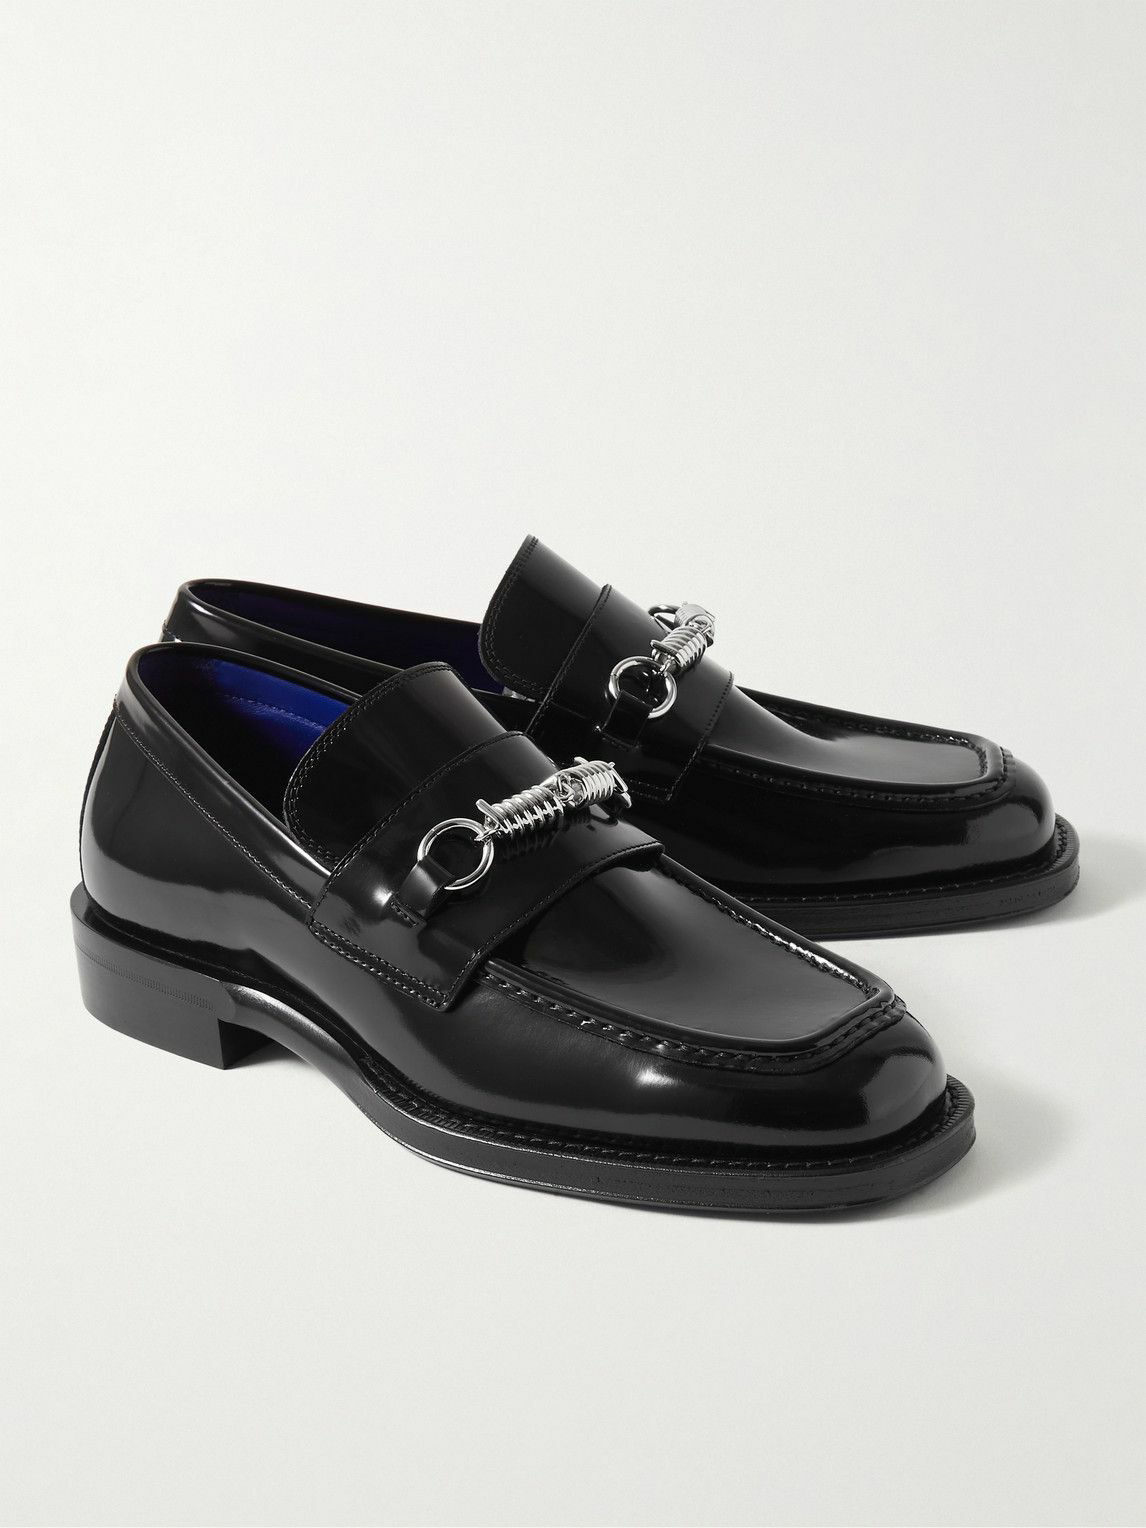 Burberry - Embellished Glossed-Leather Loafers - Black Burberry